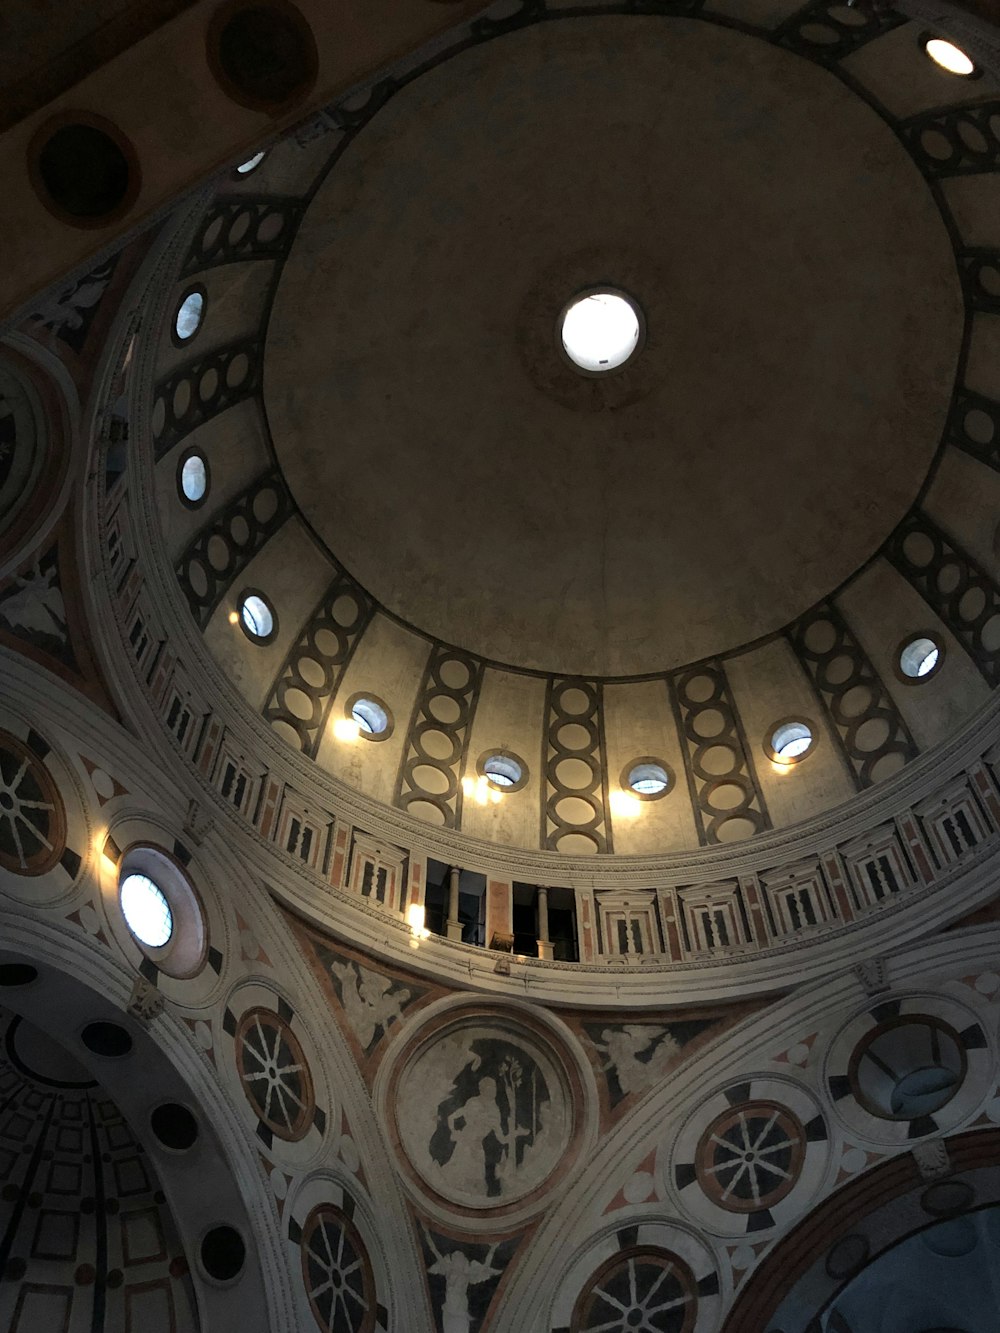 the ceiling of a large building with round windows